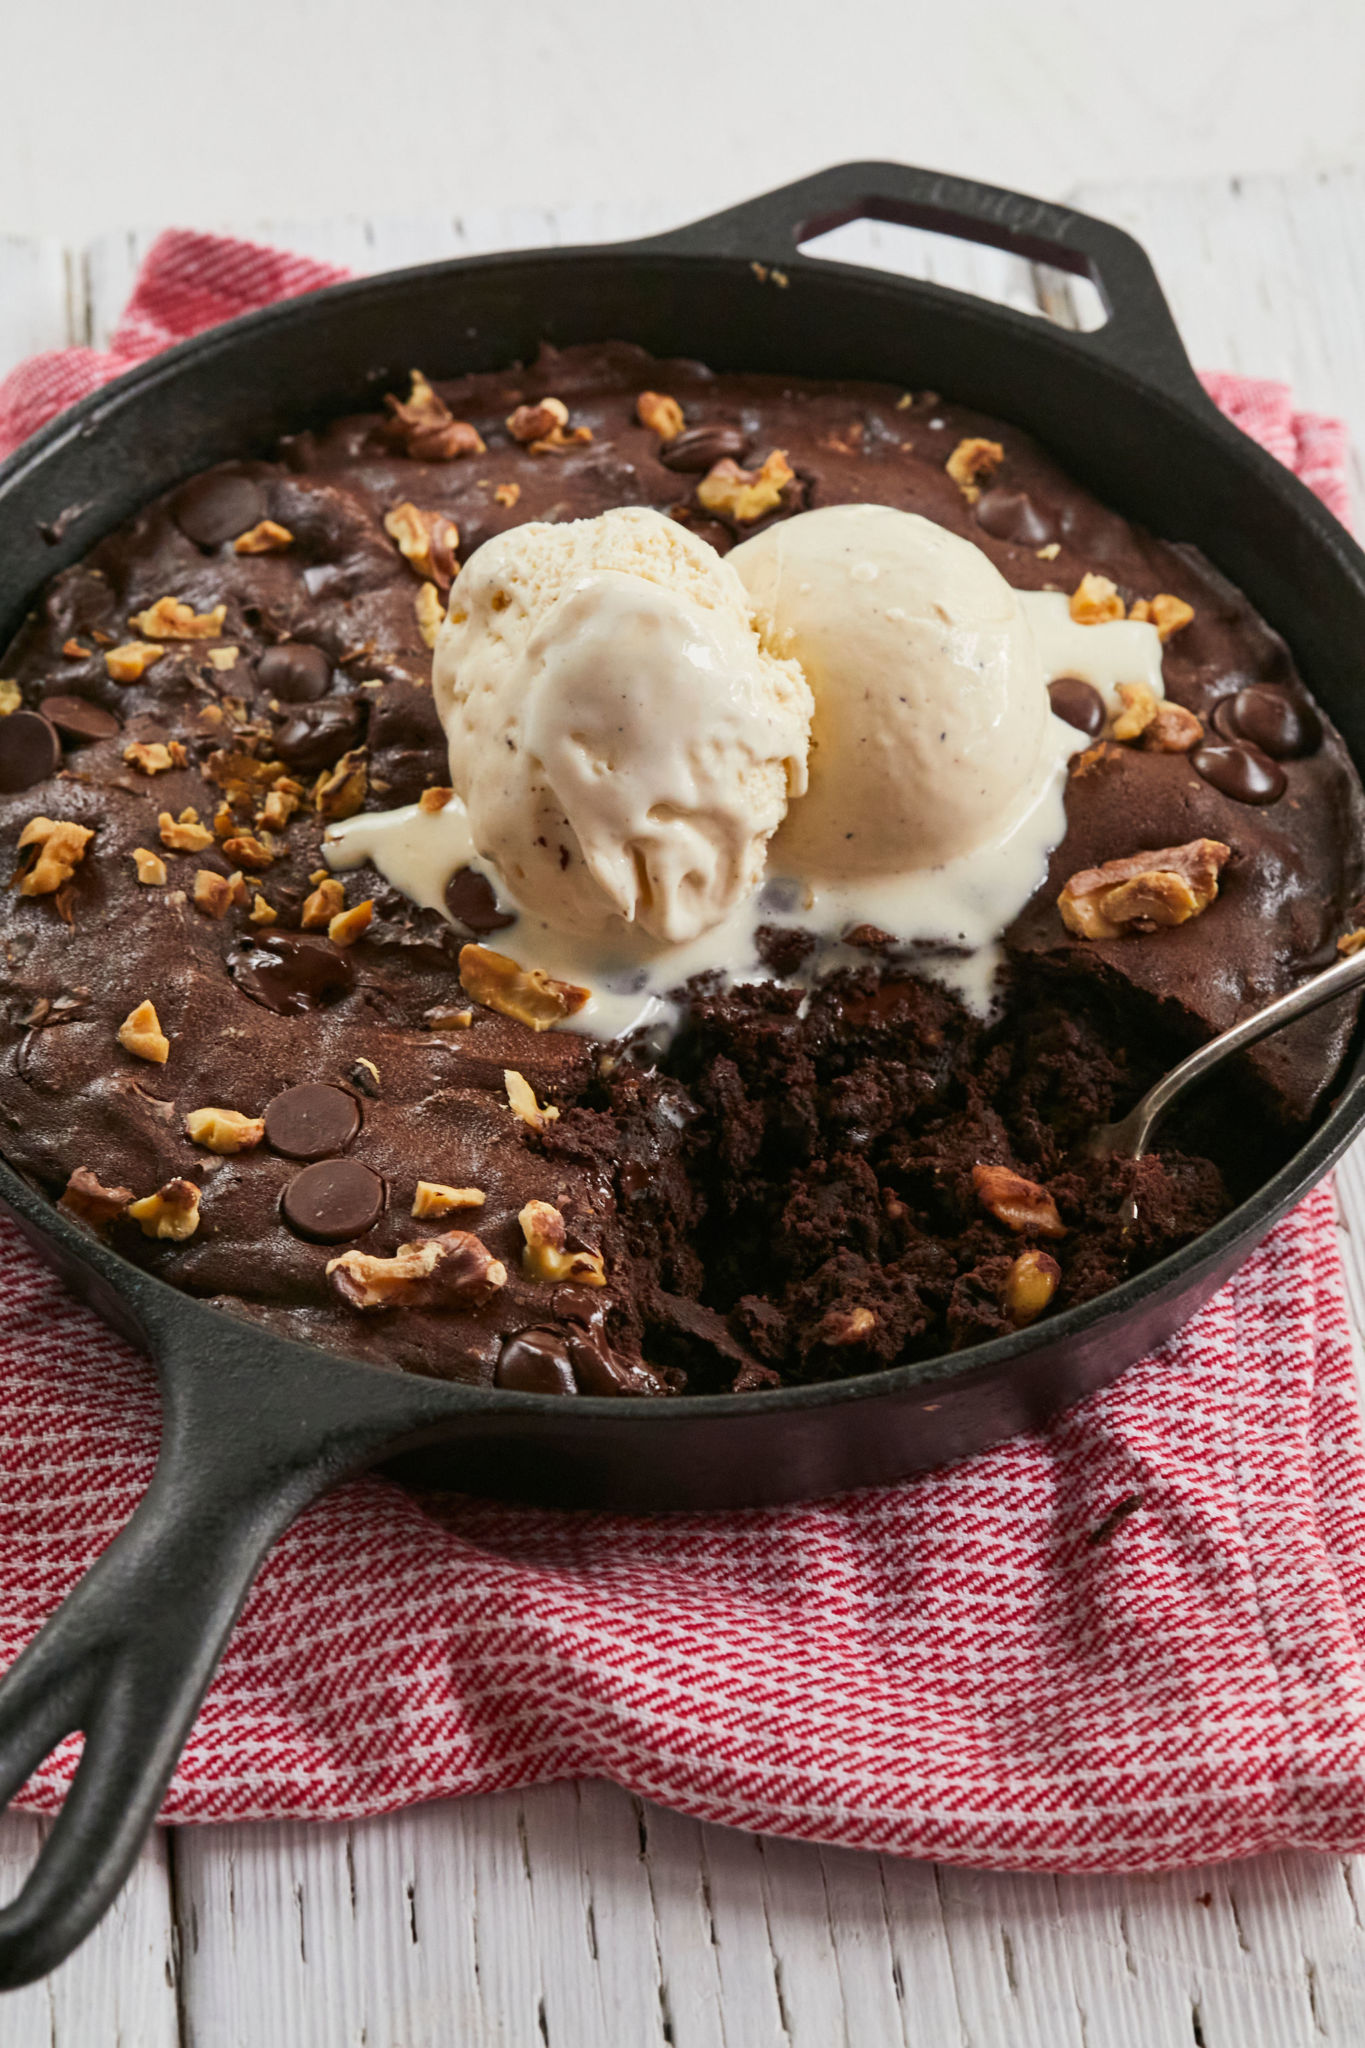 Skillet Brownies are topped with ice cream, packed with chocolate chips and nuts. 